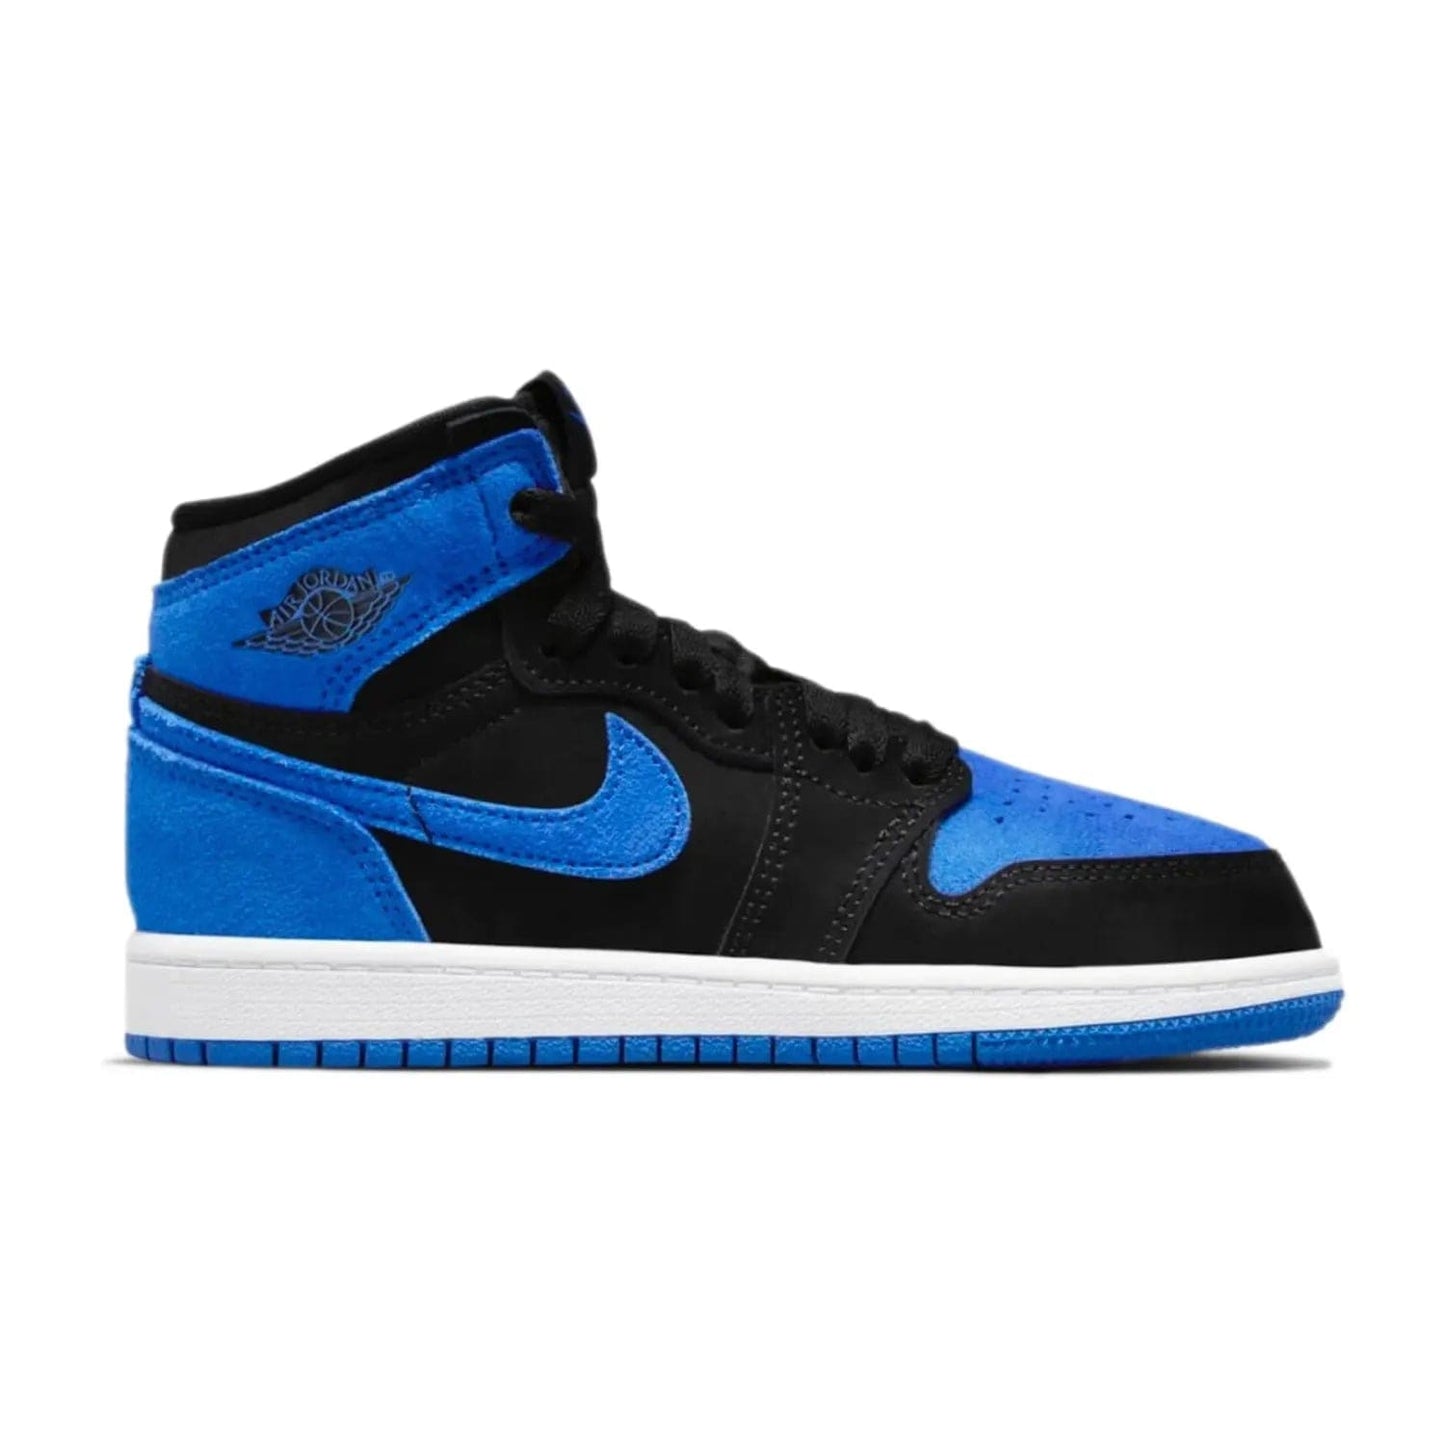 Jordan 1 Retro High OG Royal Reimagined (PS) - Image 1 - Only at www.BallersClubKickz.com - Fresh take on a classic: Jordan 1 Retro High OG Royal Reimagined. Versatile black and royal blue, white colorway. Bold details for a classic retro look. Perfect for all your street-style needs. Get yours now!